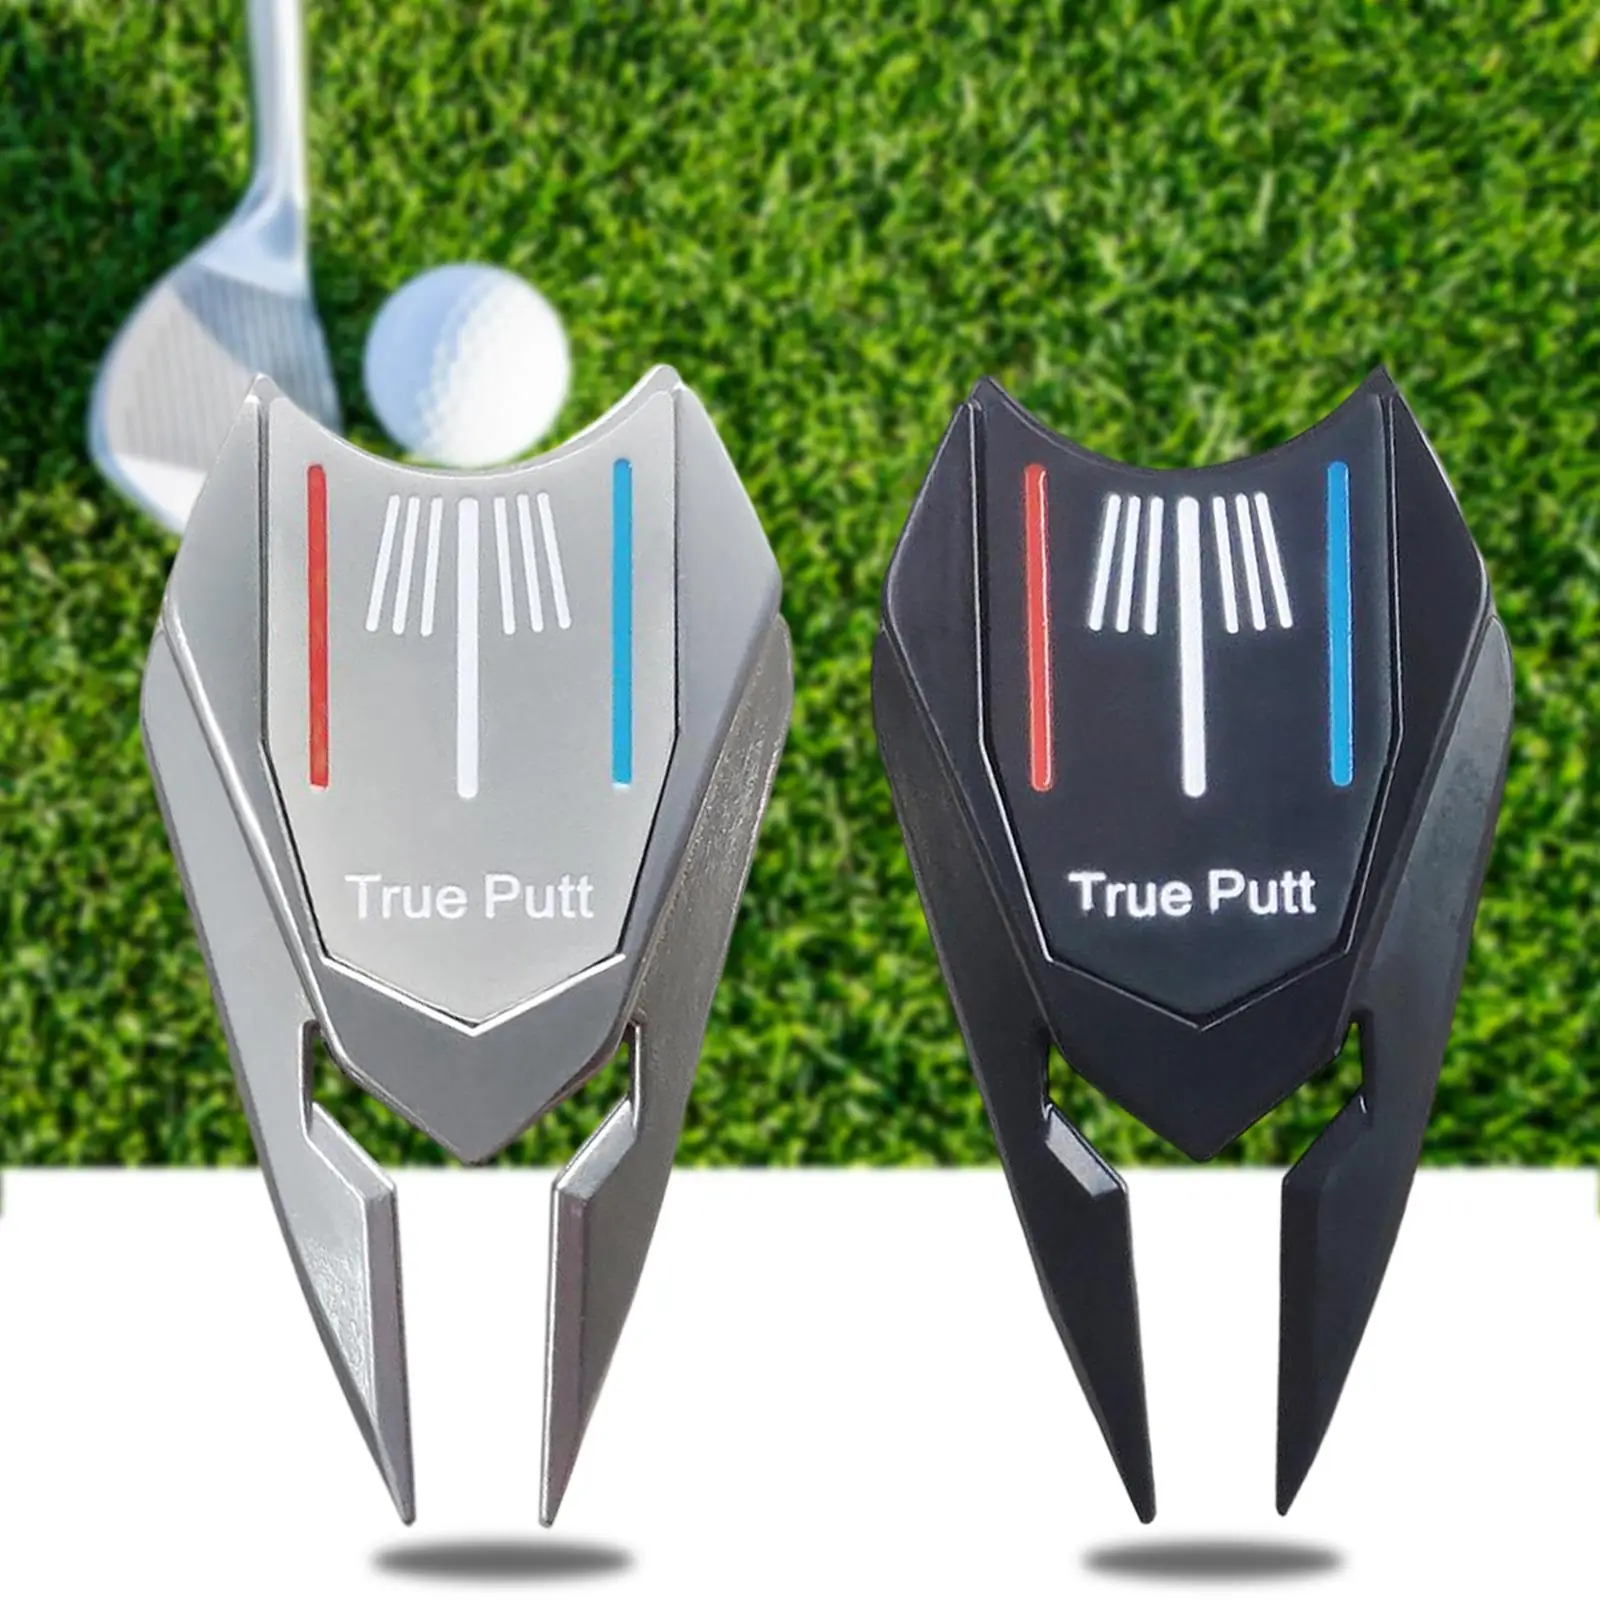  Repair Fork Golf Ball Marker Golf Accessories Detachable Golfer,Easy to Carry